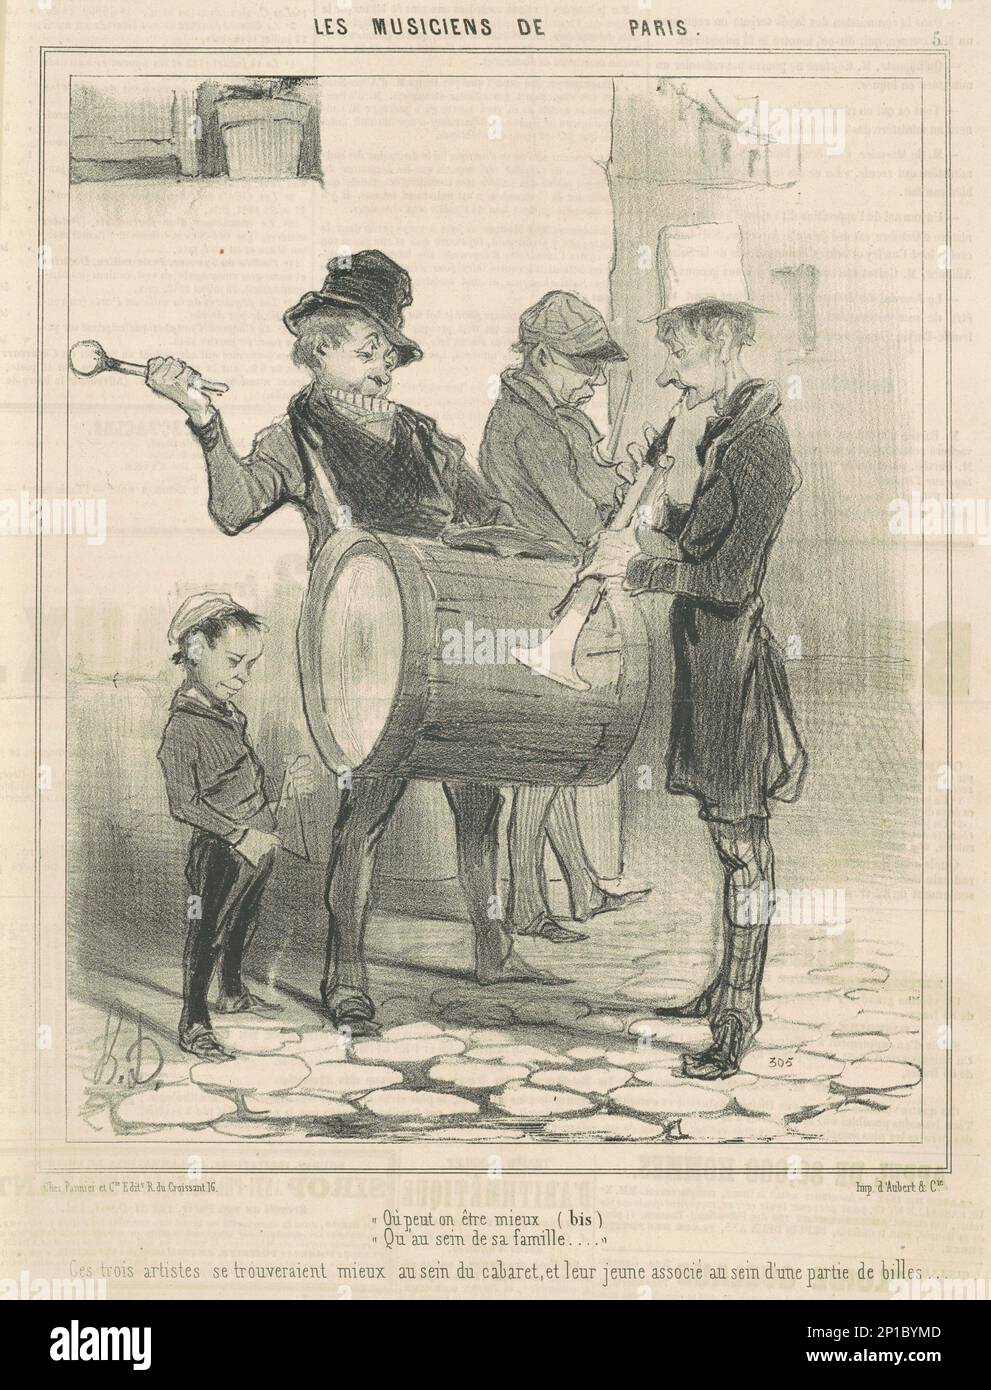 Ou peut on &#xea;tre mieux ..., 19th century. Musicians of Paris. O&#xf9; peut-on &#xea;tre mieux qu'au sein de sa famille? ['Where can one be better than in the bosom of one's family?' non-offical French national anthem]. These three artistes would do better in the music hall, and their young colleague should be playing marbles. Stock Photo